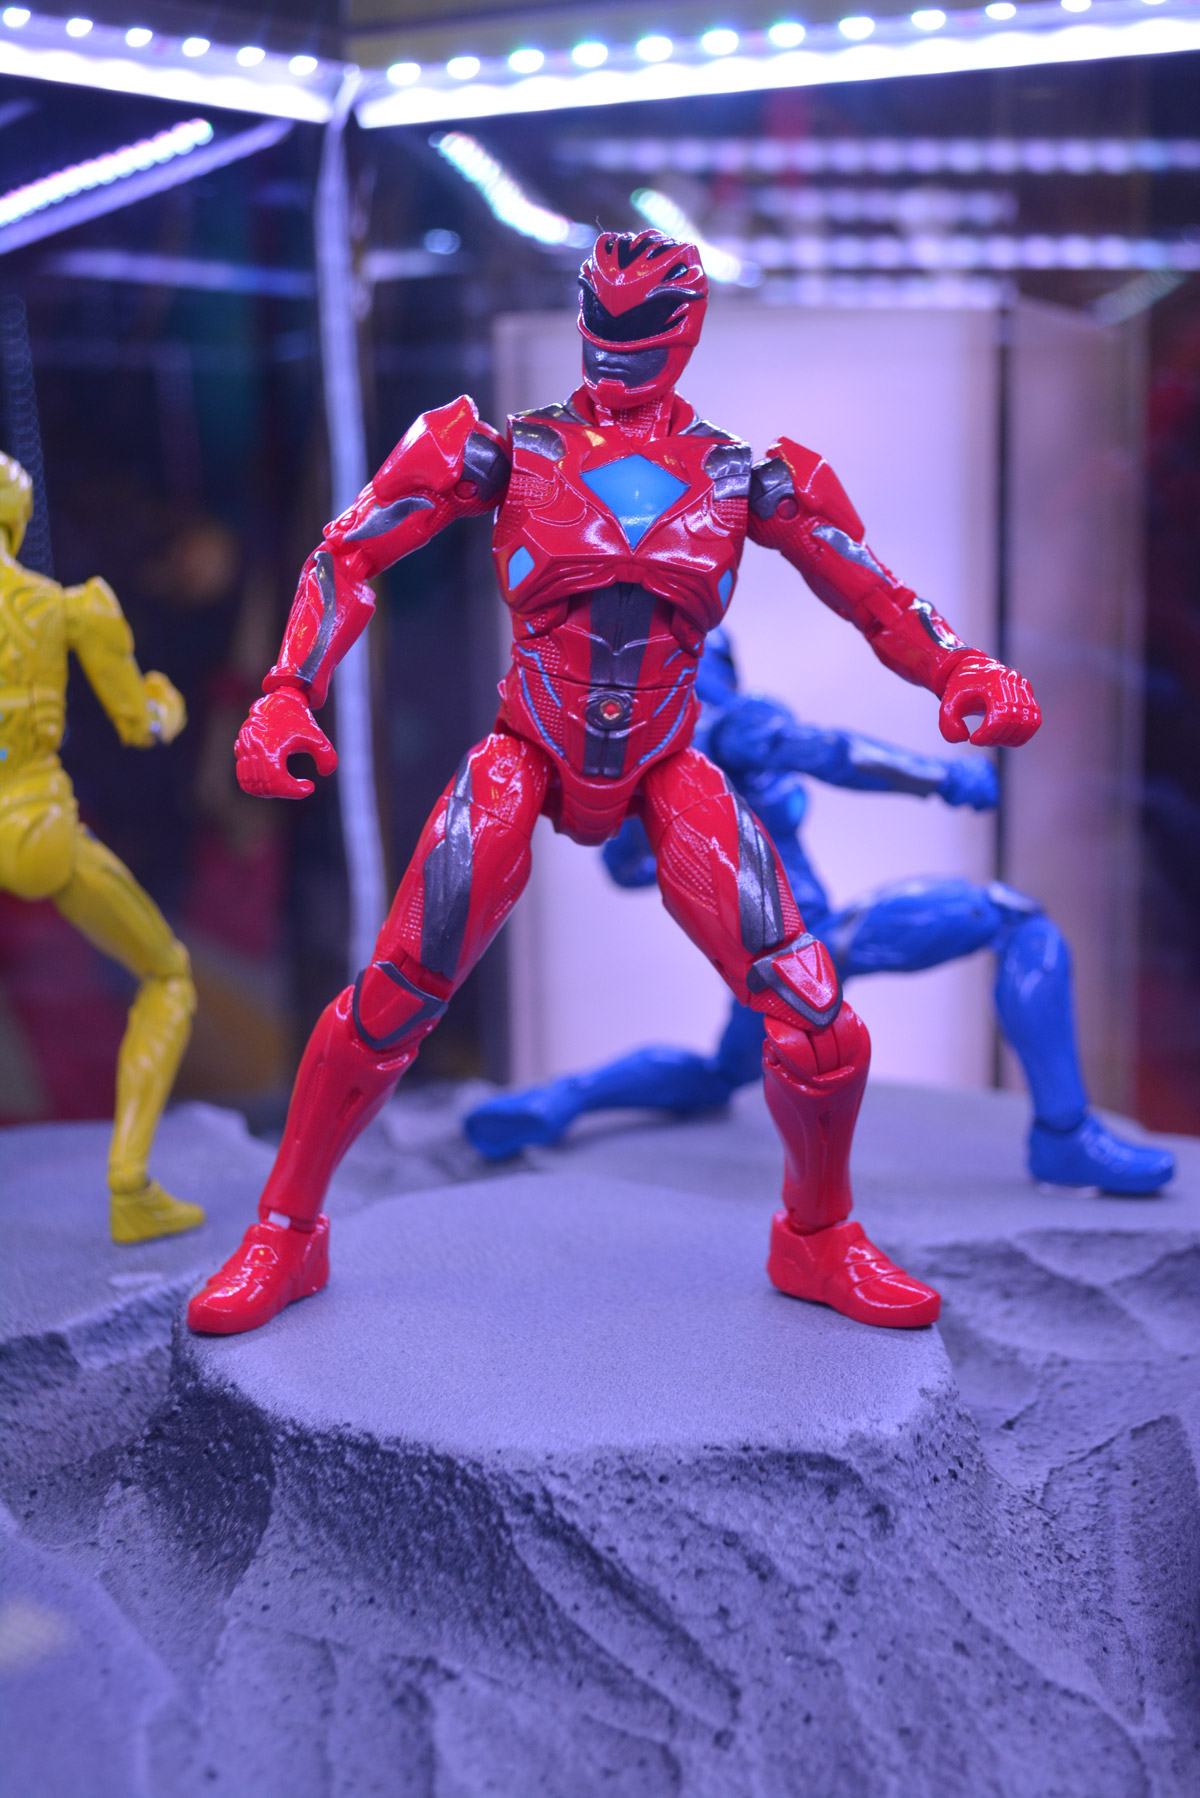 SDCC16: Power Rangers Action Figures Show New Movie Look ...